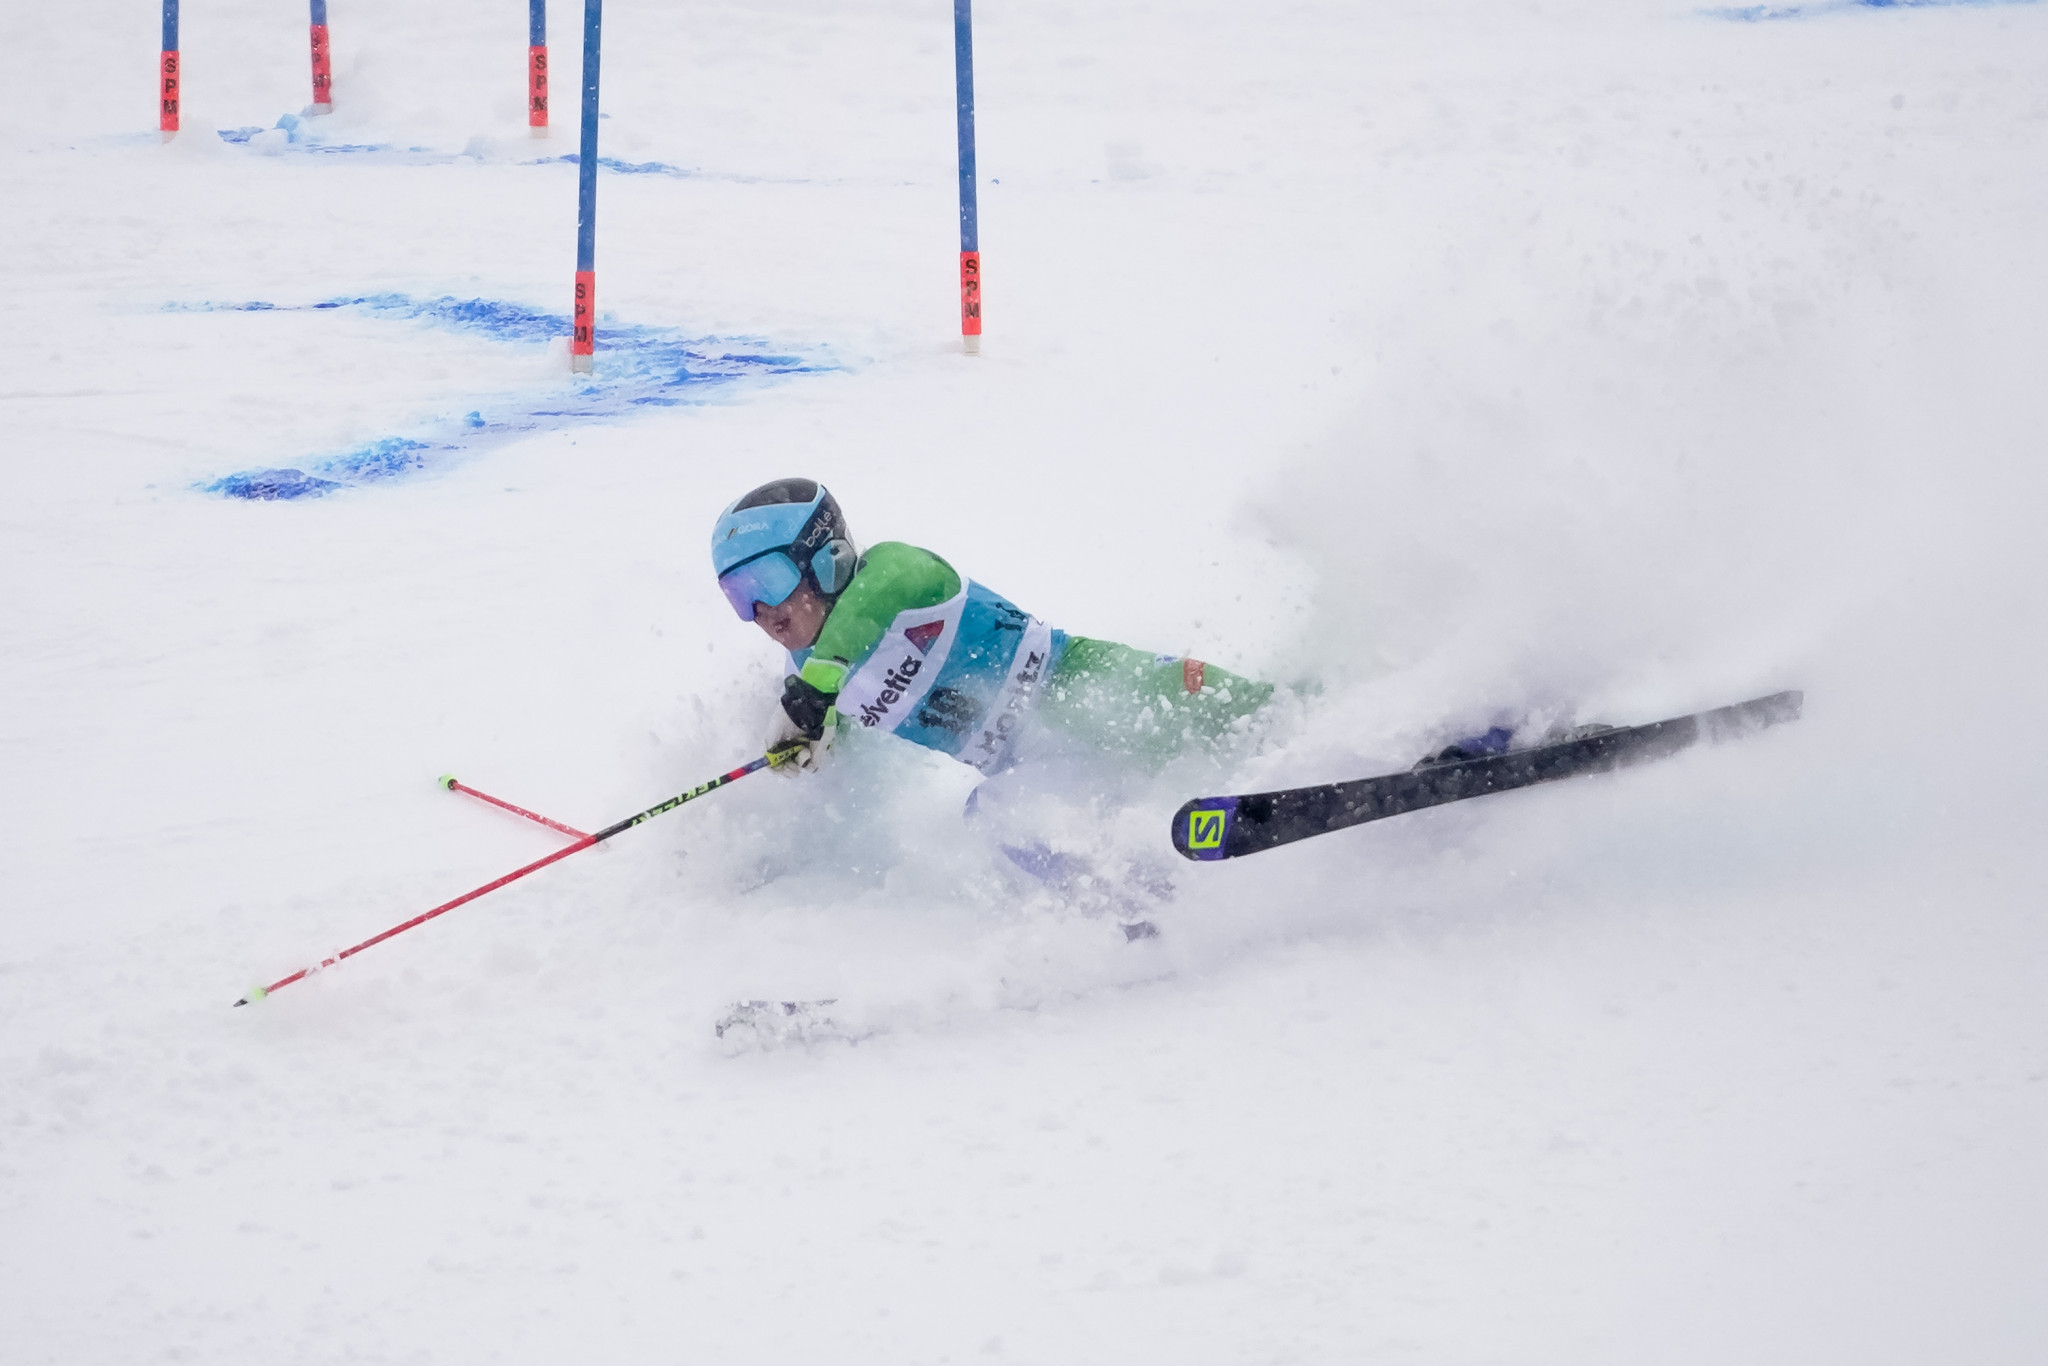 Slovenia's Meta Hrovat has had a mixed season of results having either withdrawn, crashed out or been disqualified from several races, including the FIS World Alpine Ski Championships in Åre ©Getty Images